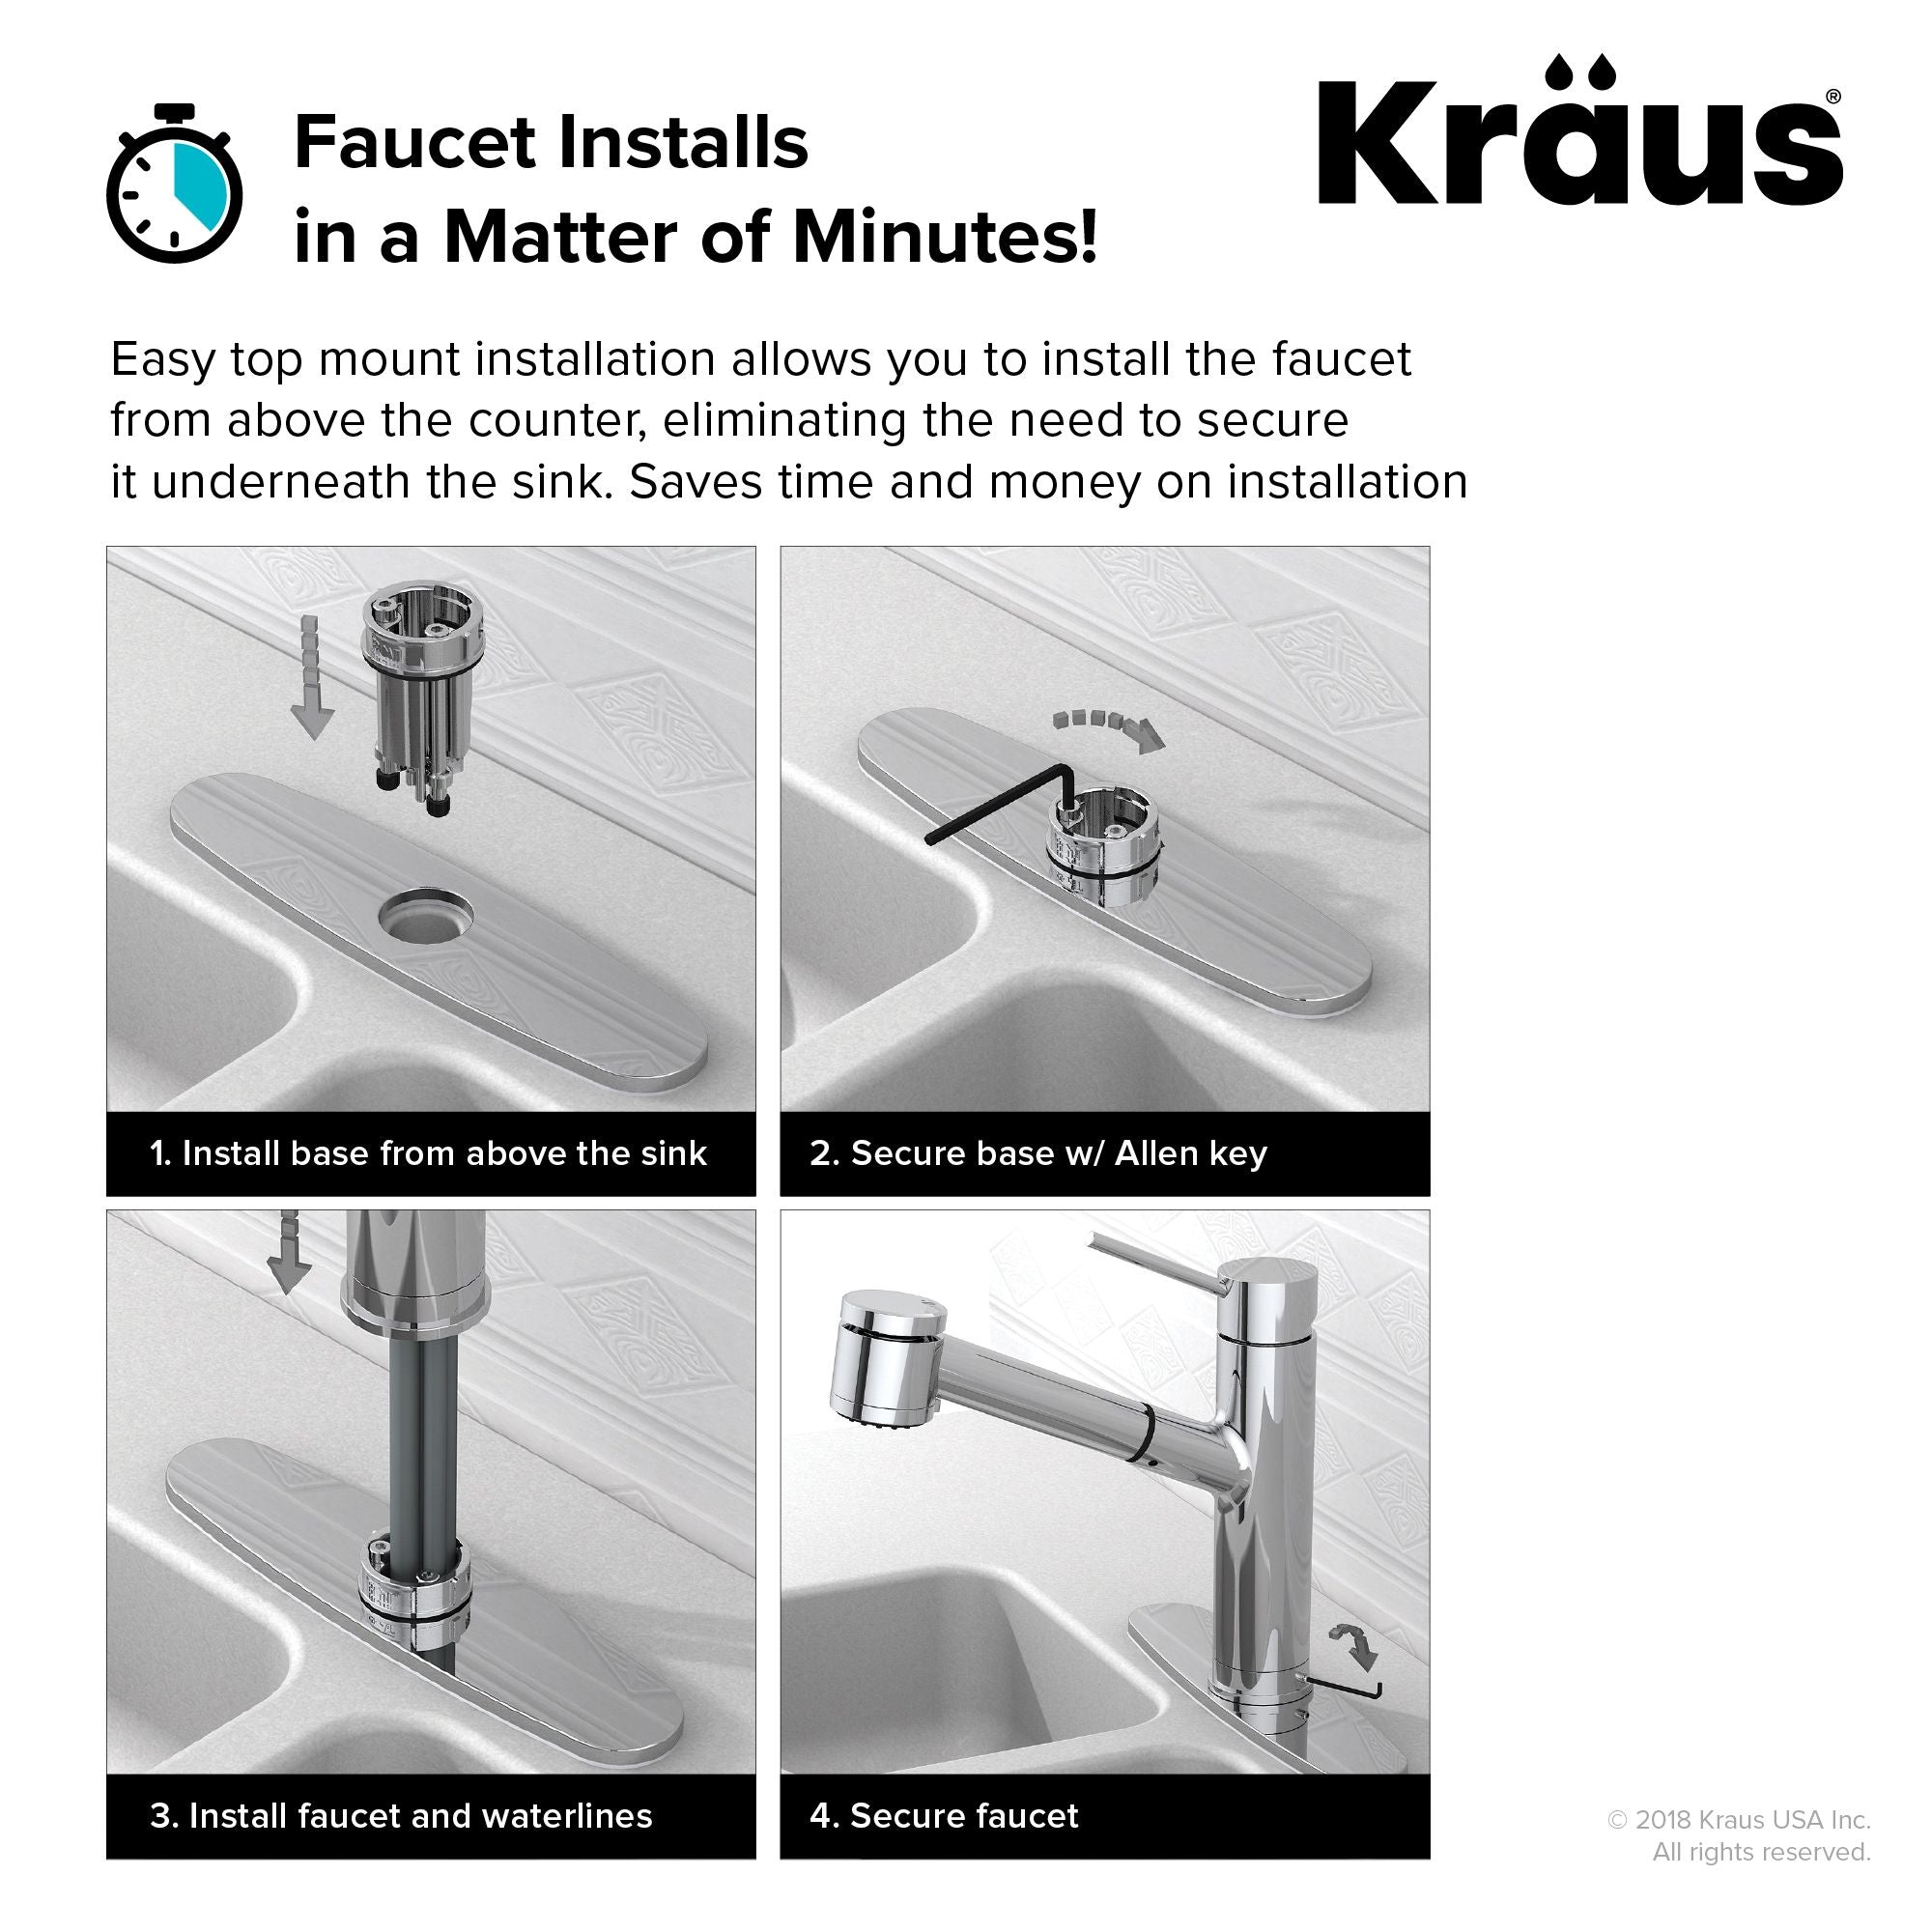 KRAUS Oletto Single Lever Pull Down Kitchen Faucet in Spot Free all-Brite Stainless Steel KPF-2620SFS | DirectSinks